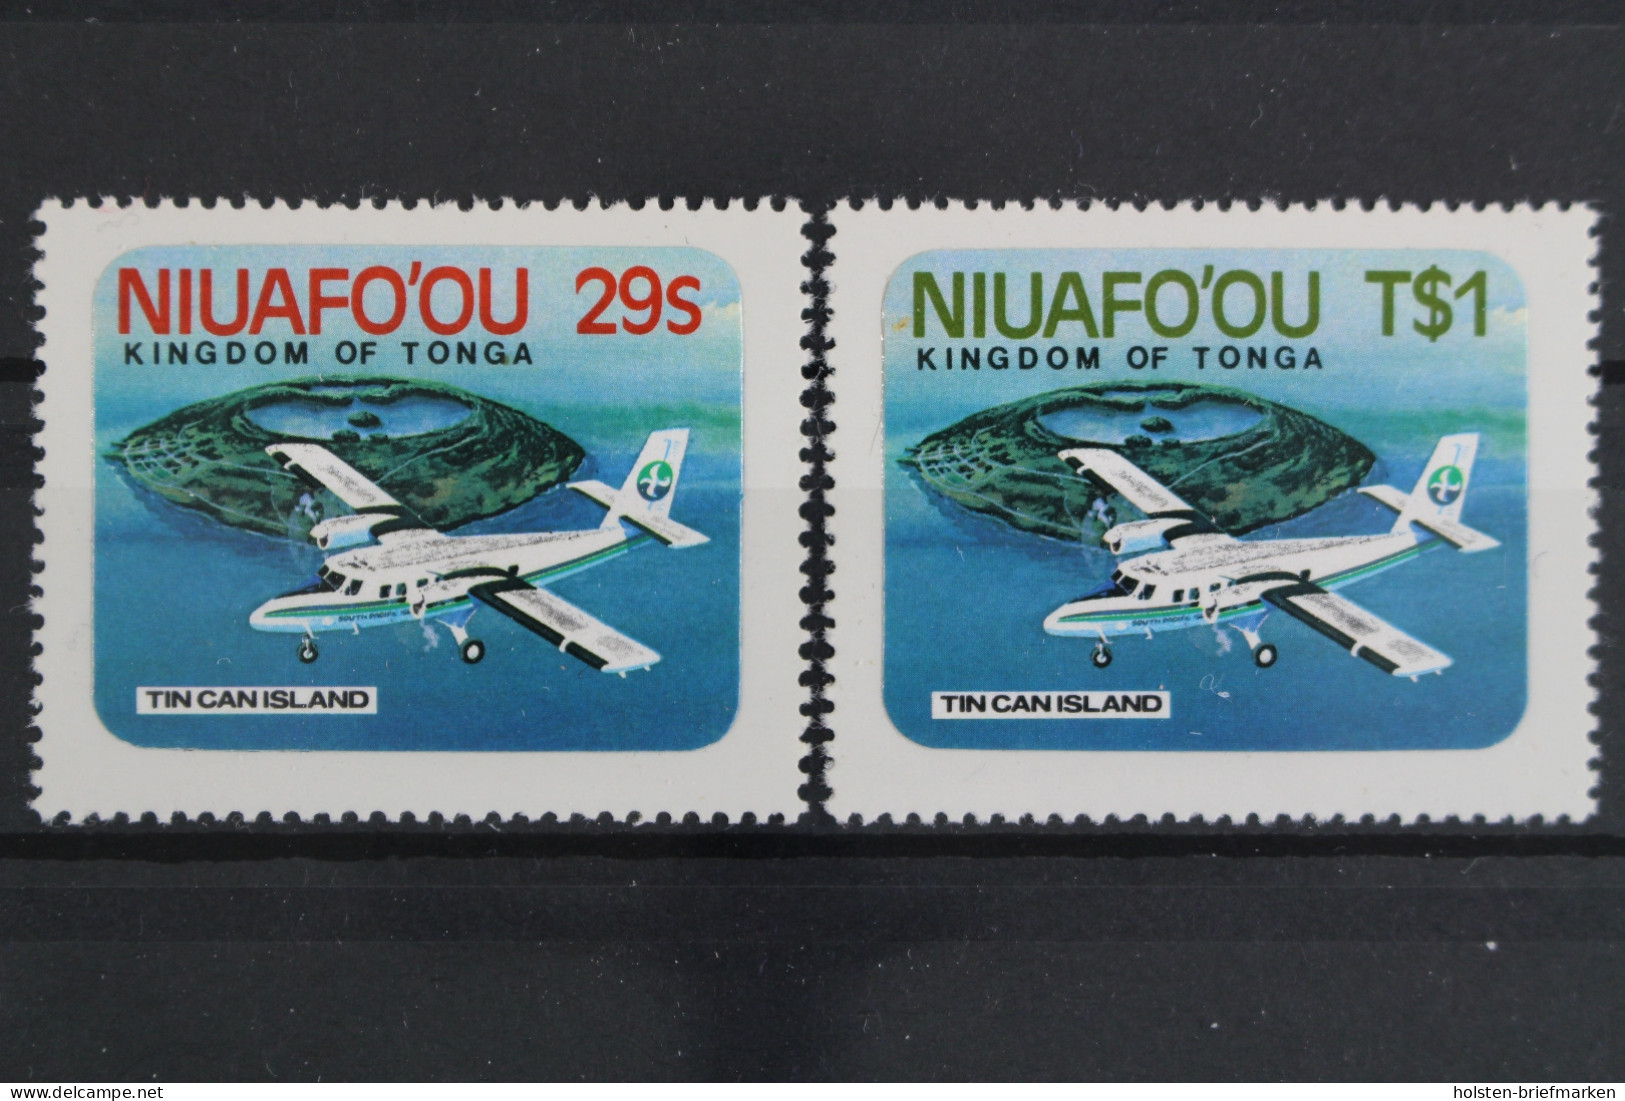 Niuafo-Inseln, Flugzeuge, MiNr. 1-2, Selbstklebend, Postfrisch - Oceania (Other)